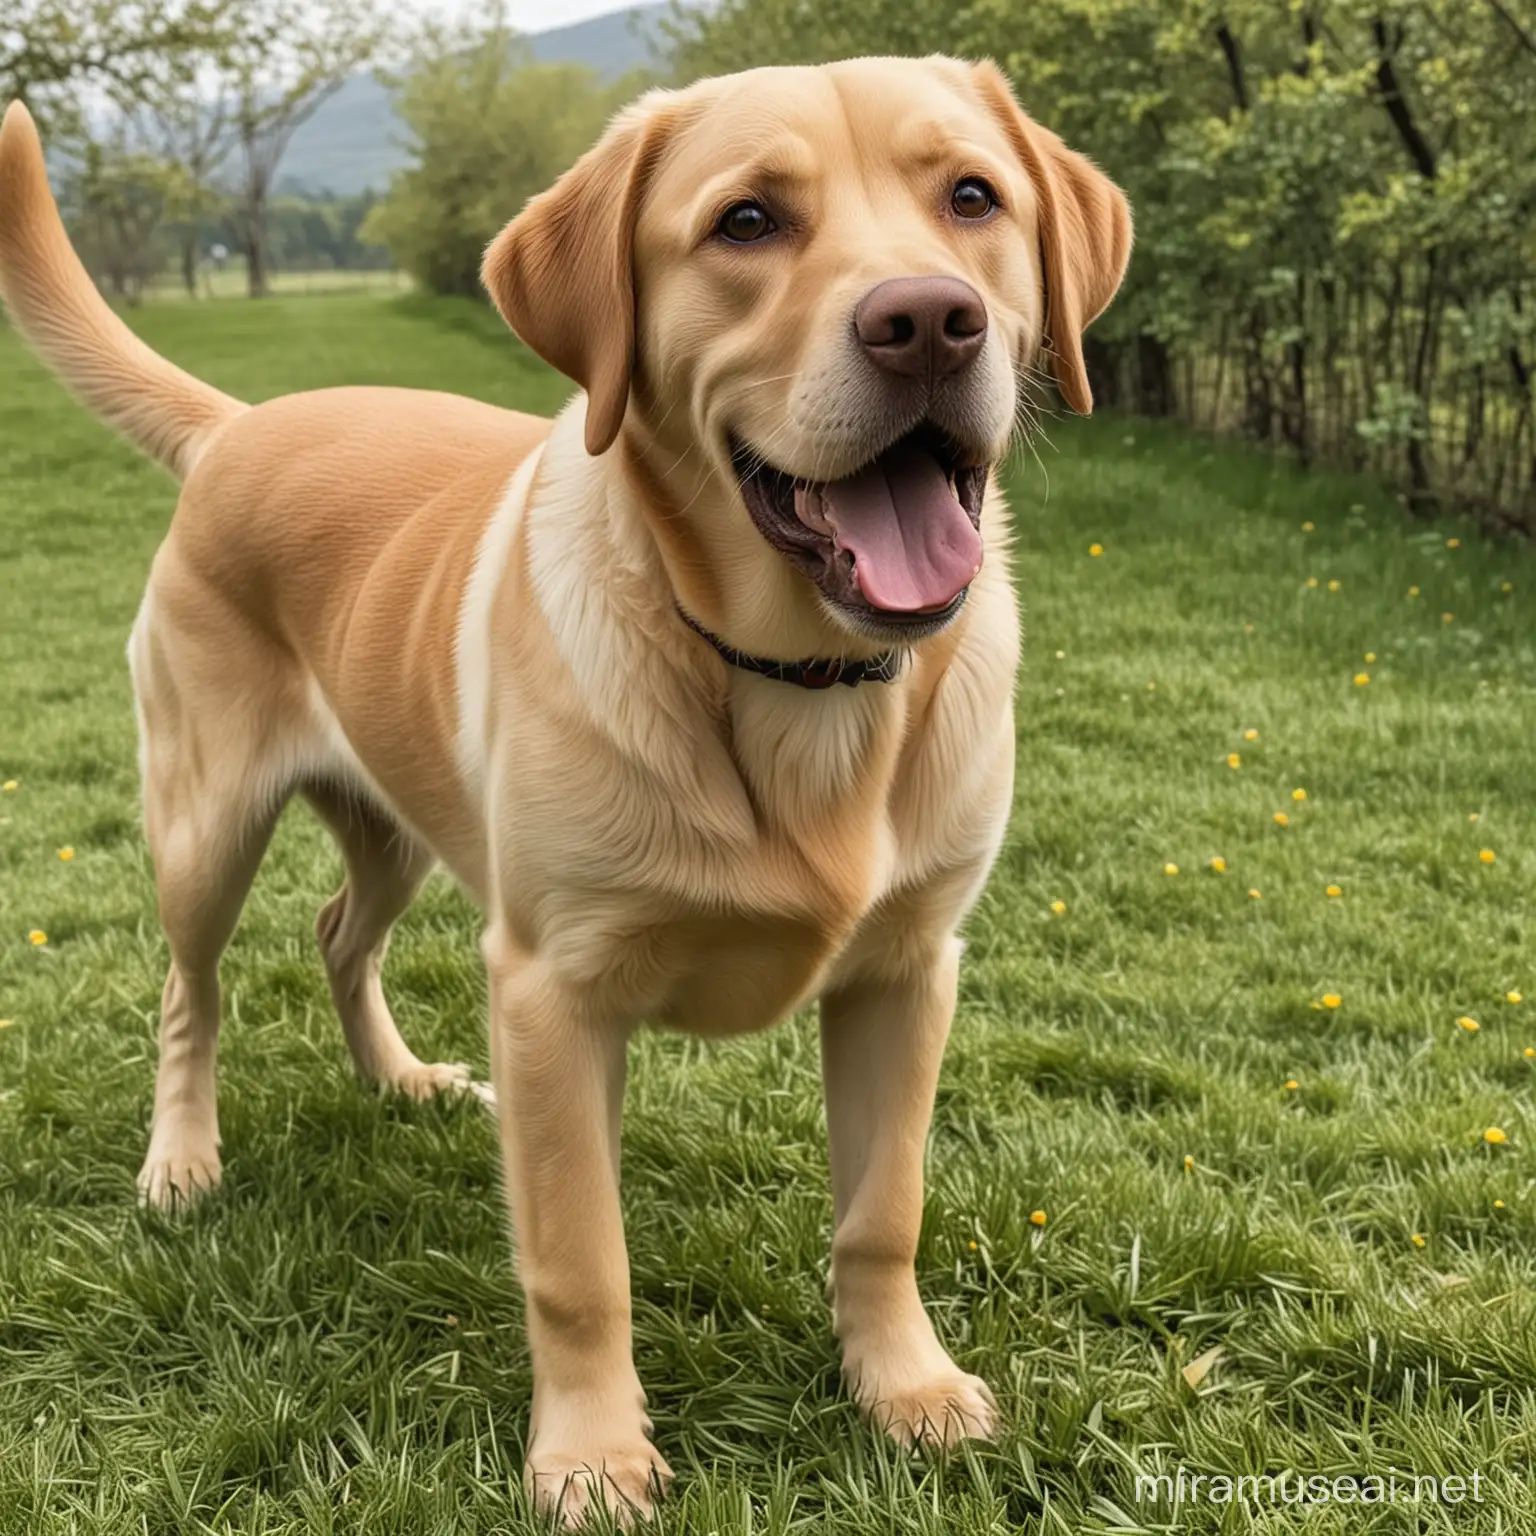 Friendly and Energetic Labrador Retriever Playing Outdoors